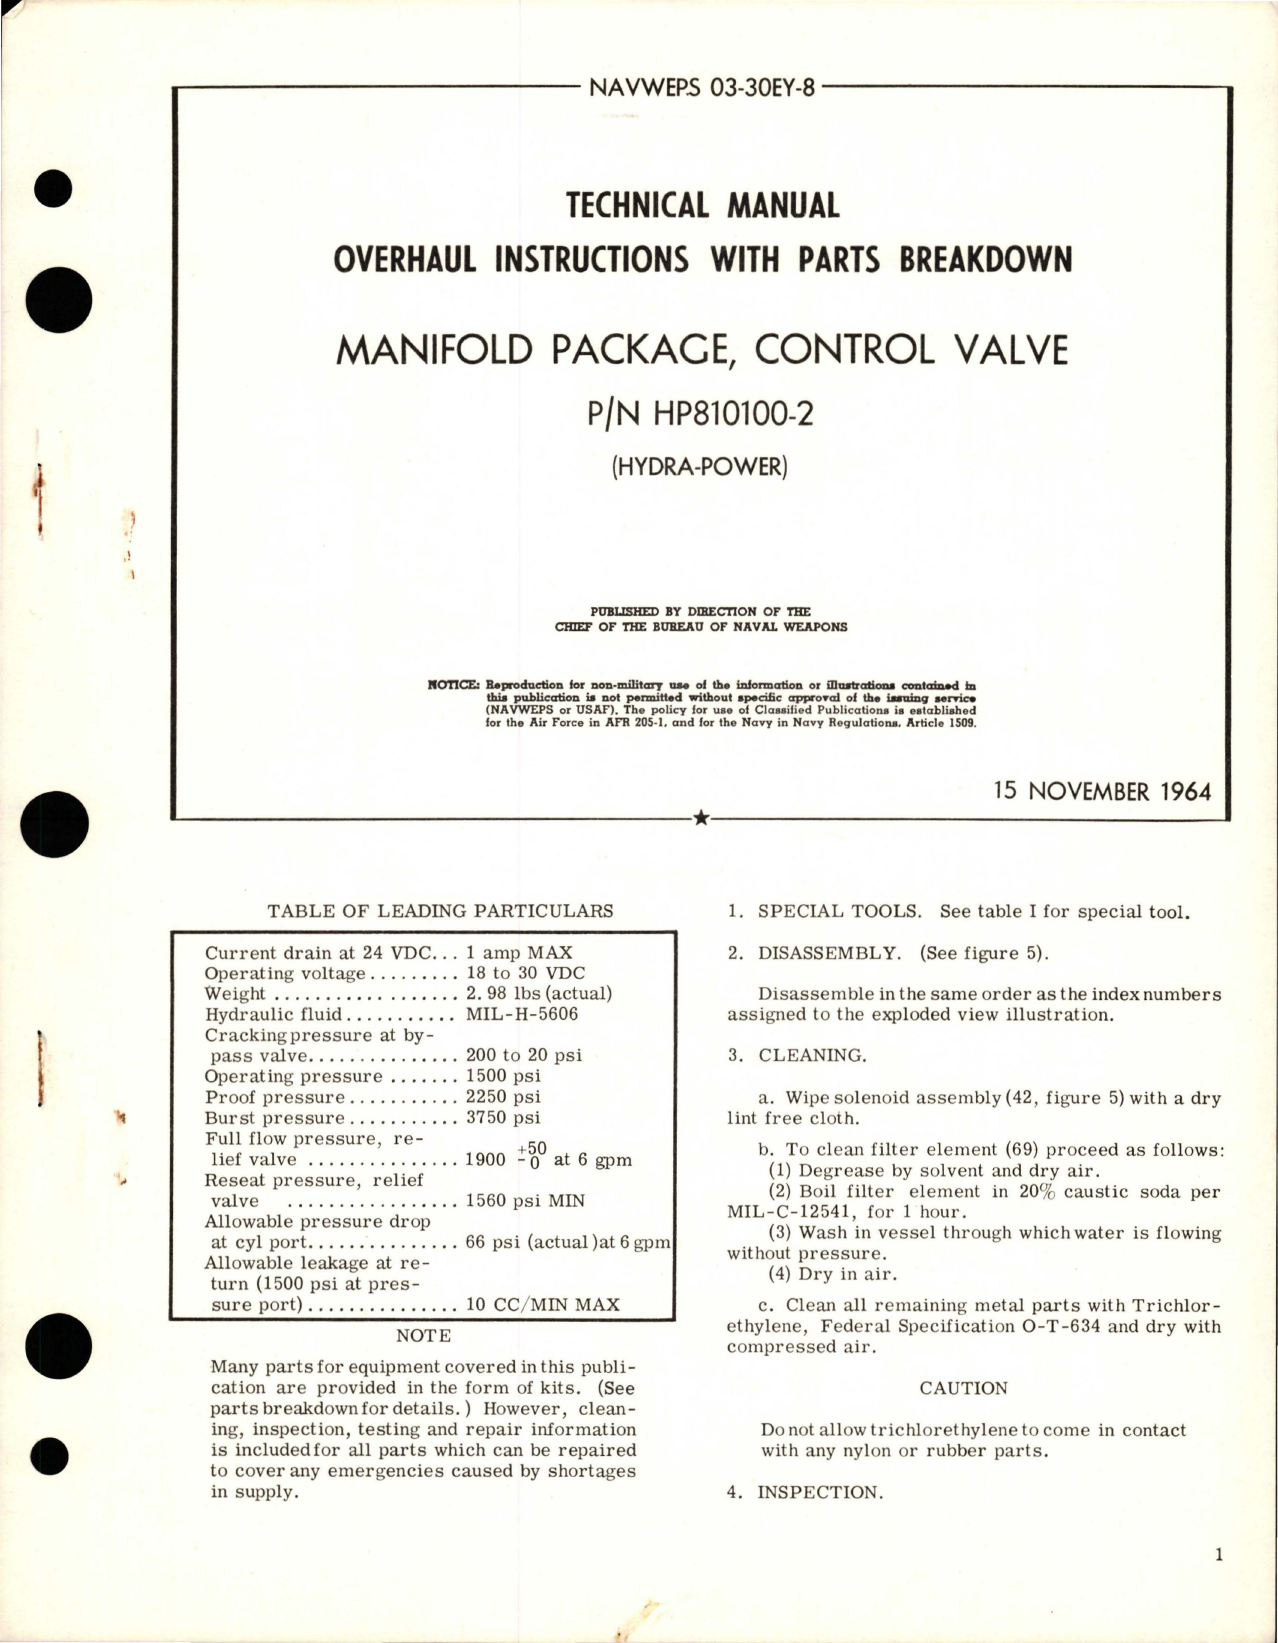 Sample page 1 from AirCorps Library document: Overhaul Instructions with Parts for Control Valve Manifold Package - Part HP810100-2 